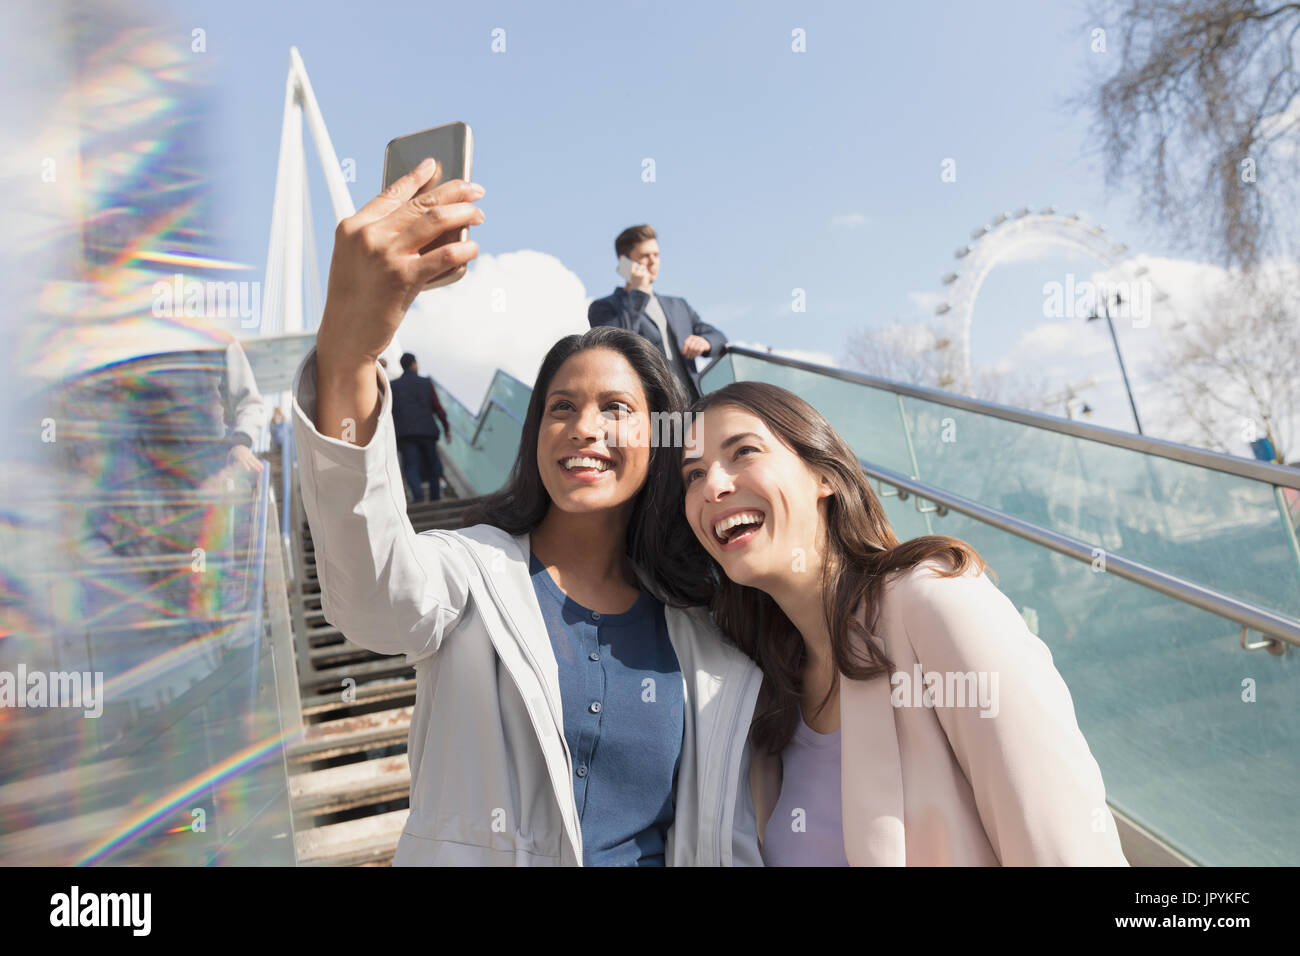 Enthusiastic, smiling women friends taking selfie with camera phone on sunny, urban stairs, London, UK Stock Photo